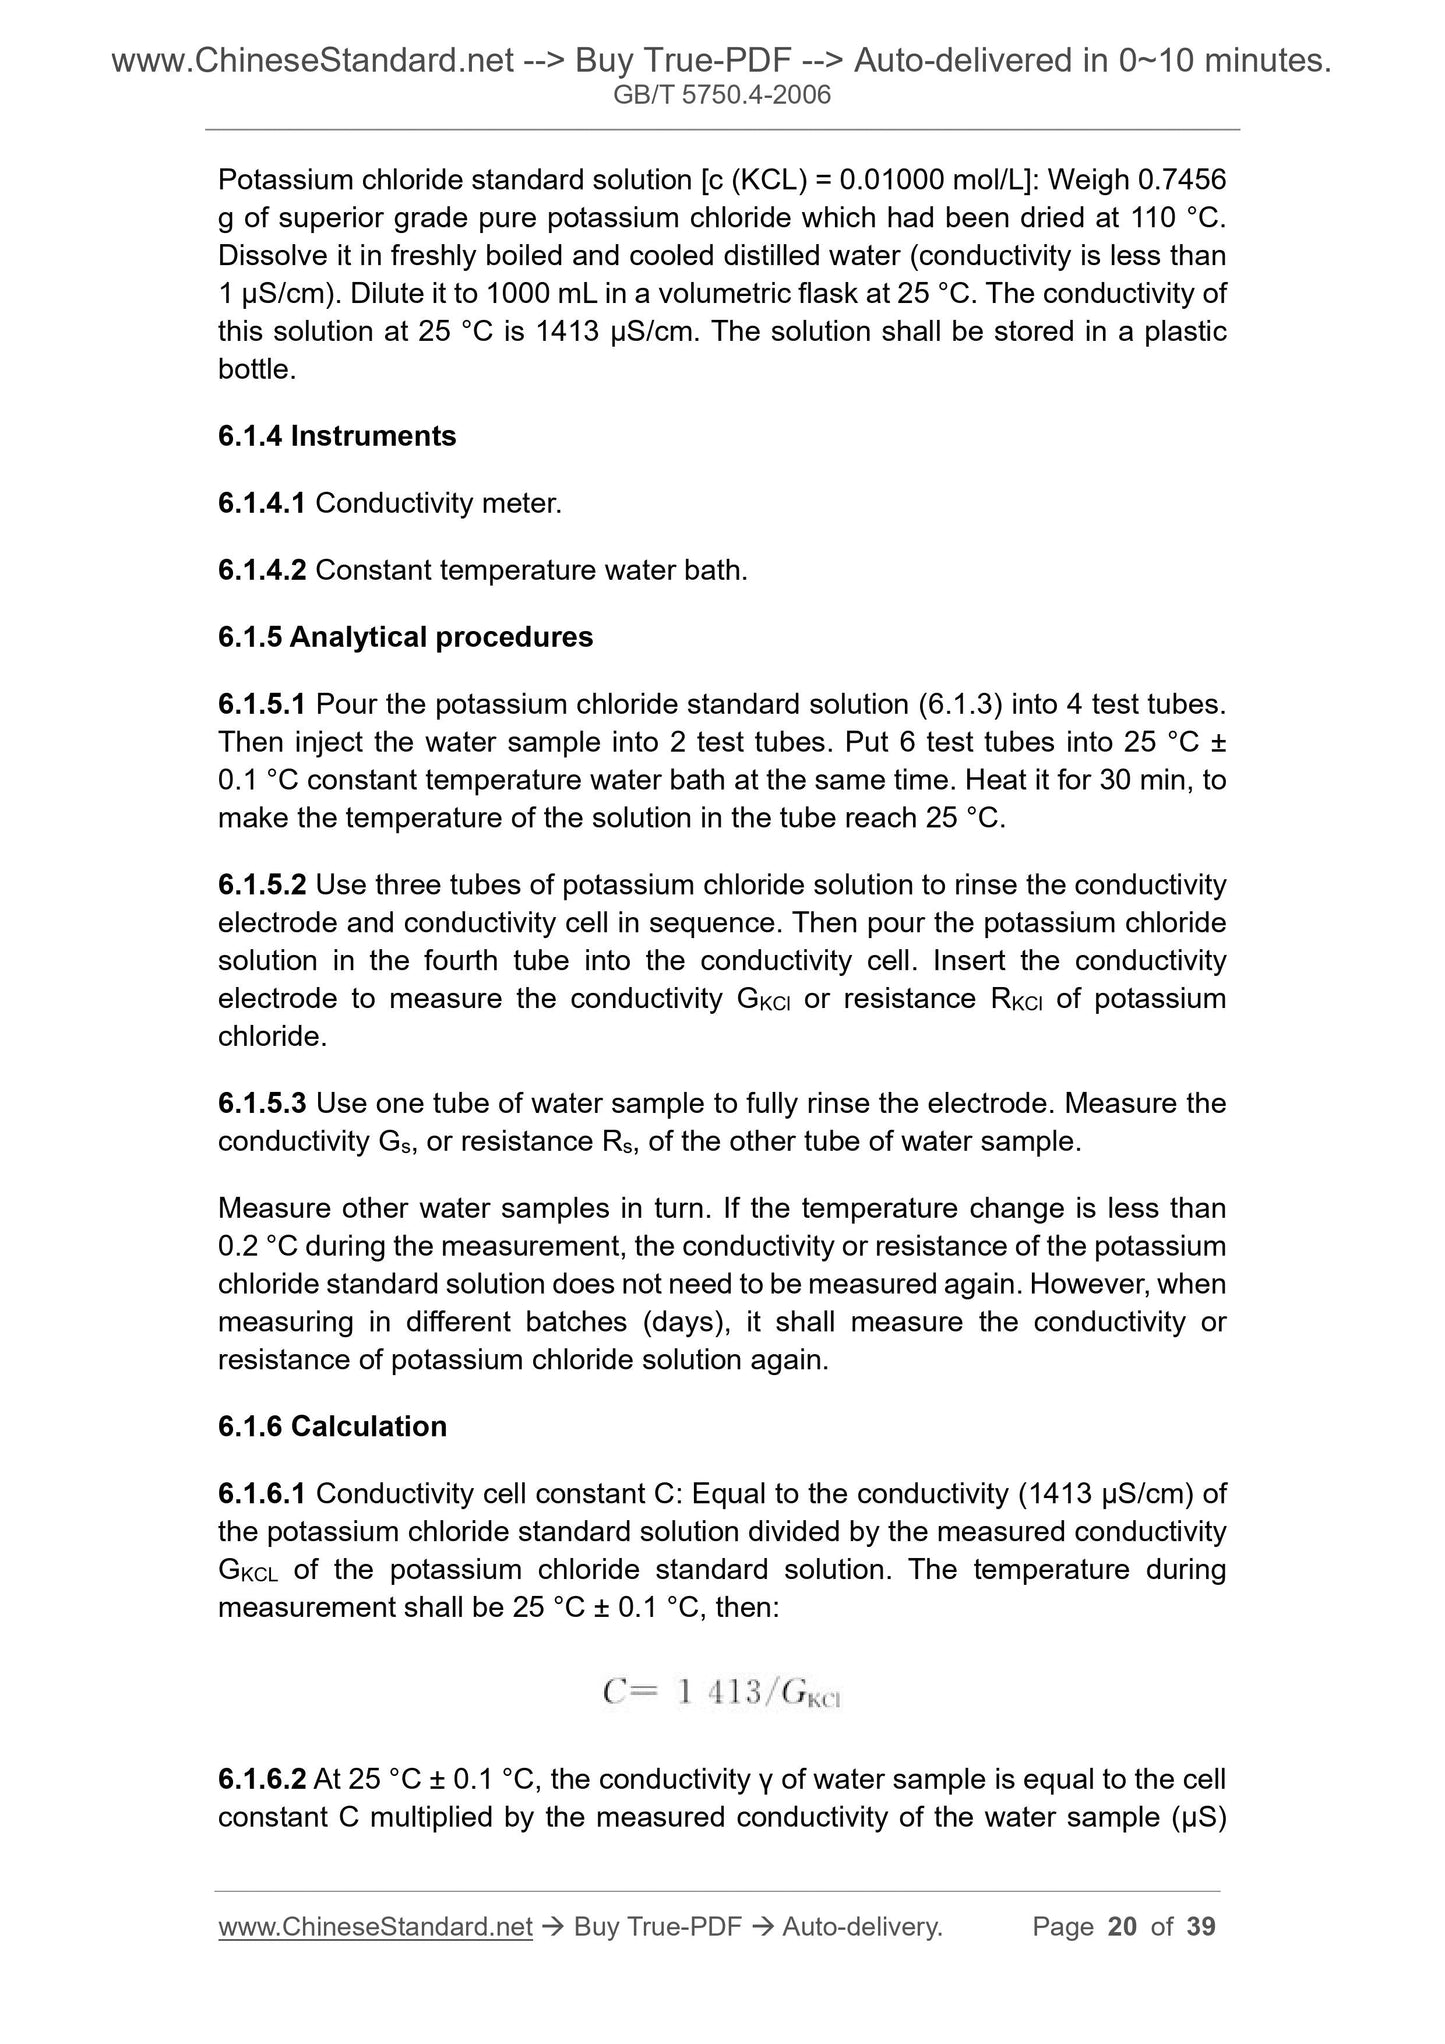 GB/T 5750.4-2006 Page 8